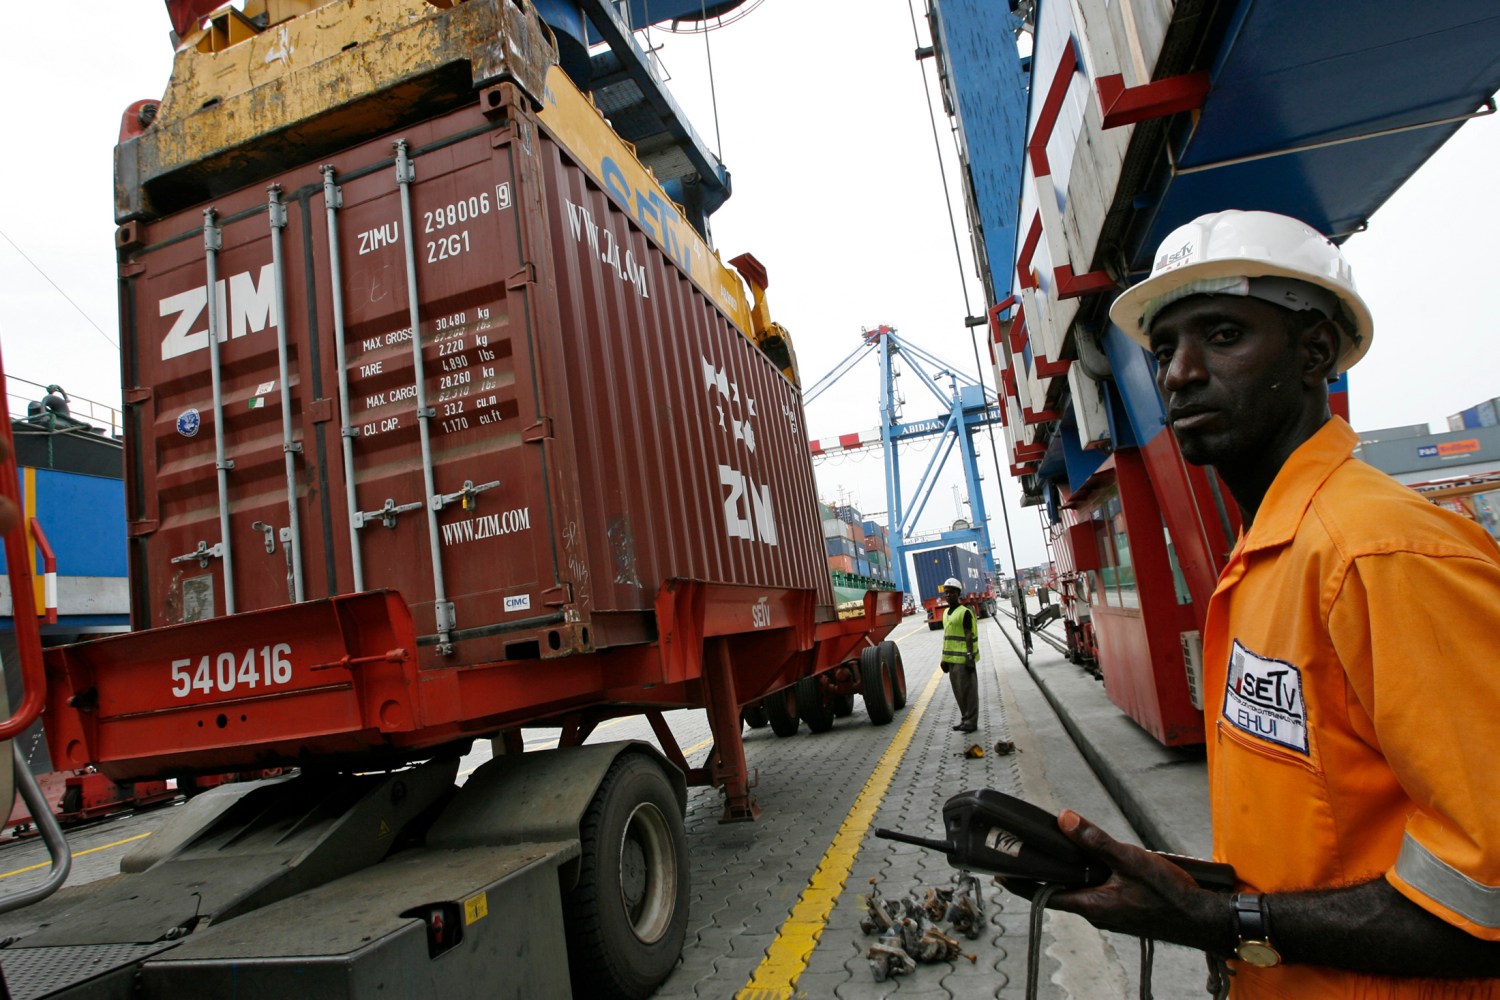 Men work at a containers terminal in Abidjan April 3, 2008. REUTERS/Luc Gnago (IVORY COAST)